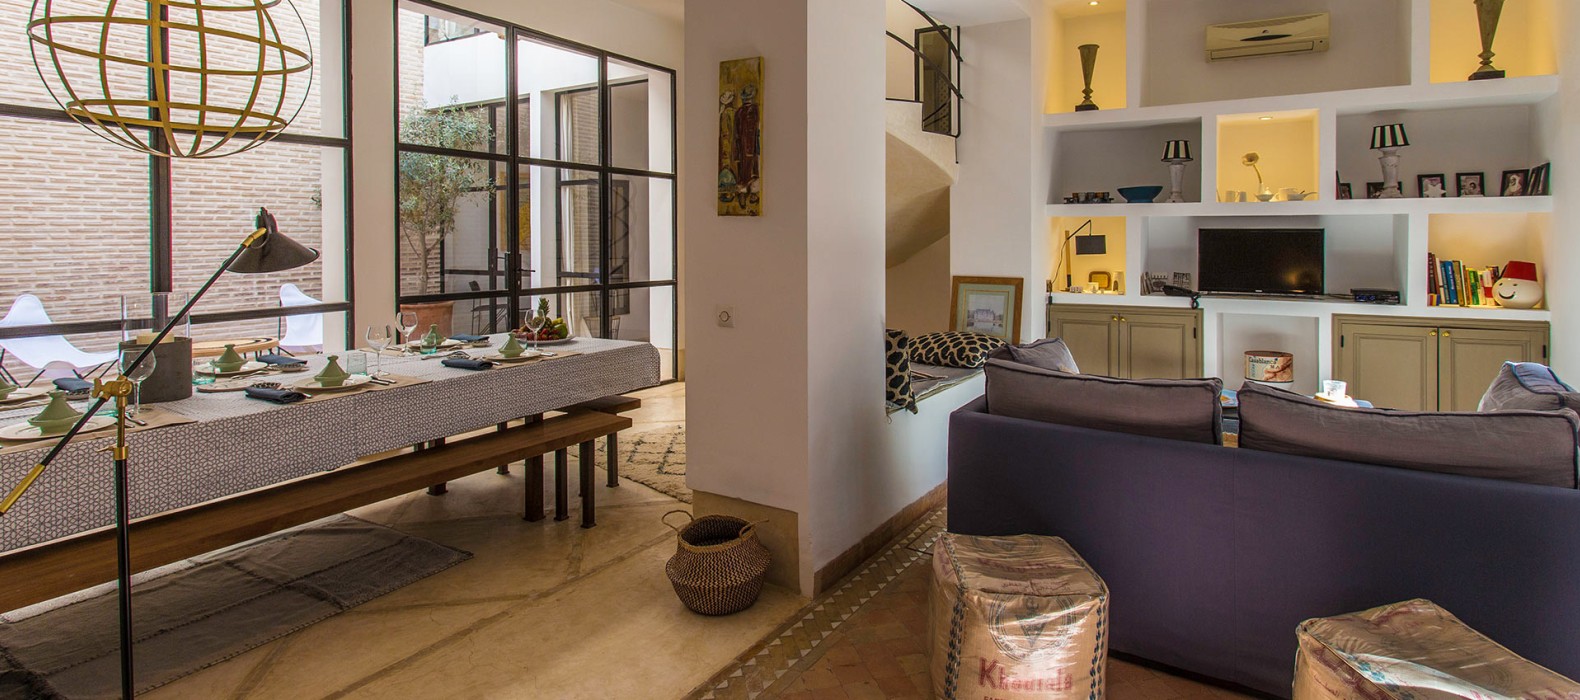 Living room view of Riad Mima in Marrakech